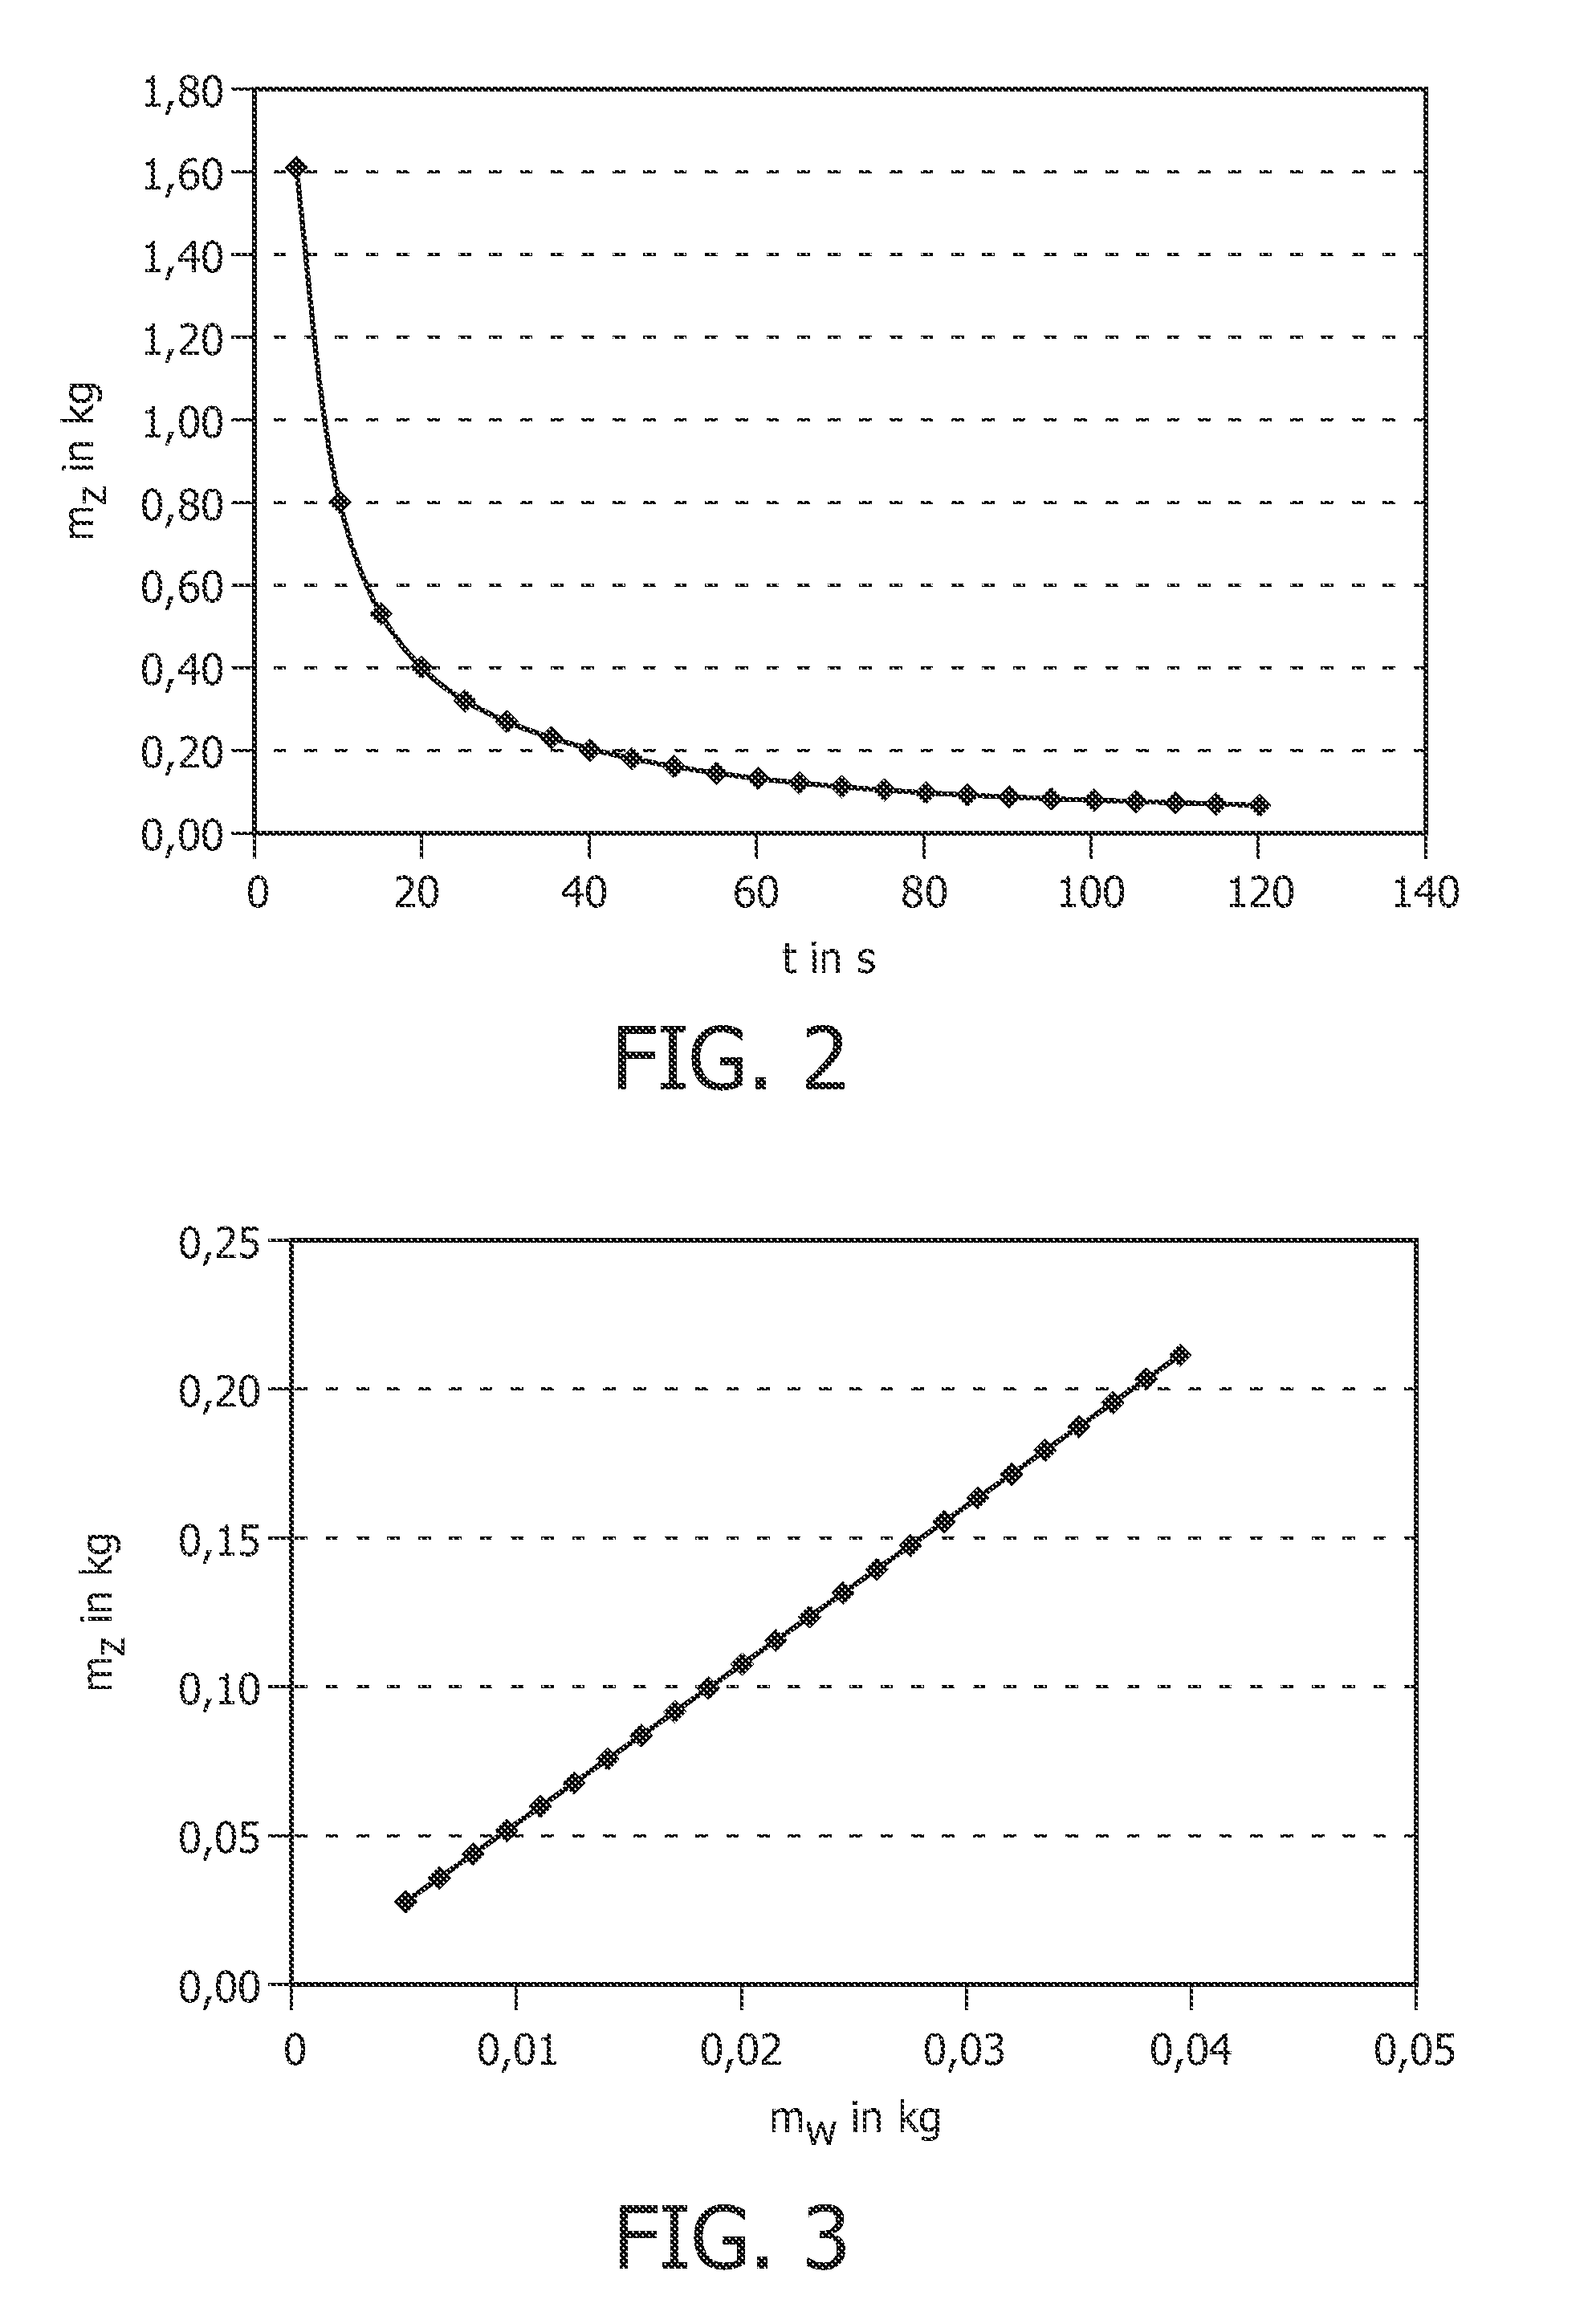 Docking station for a skin treatment device having a cooling member